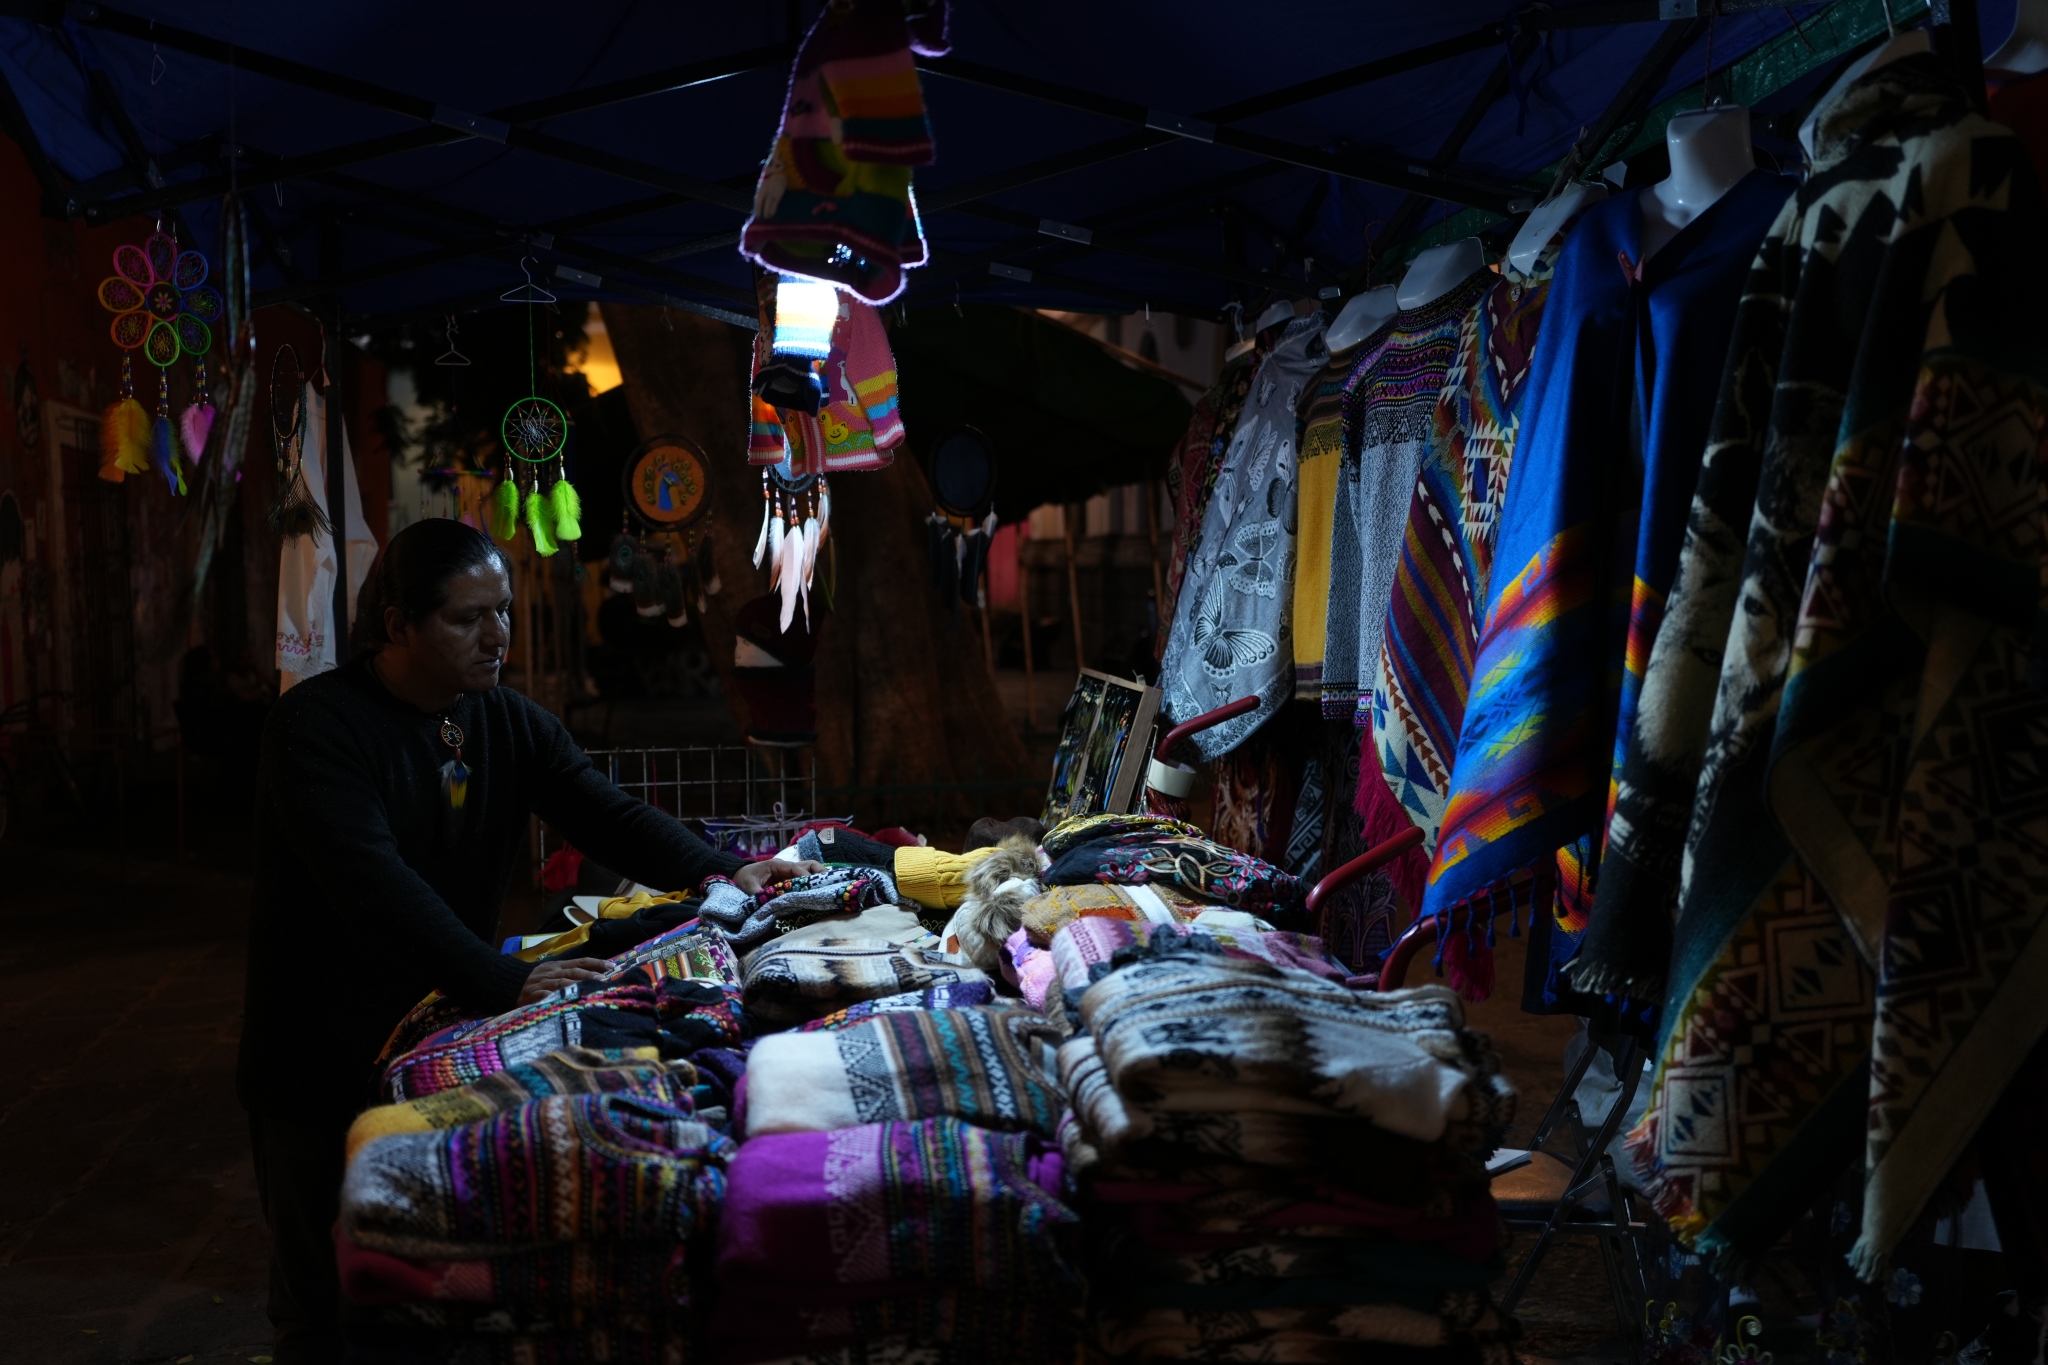 A man supervises a scarf, ties and garment stall lit by a single bulb